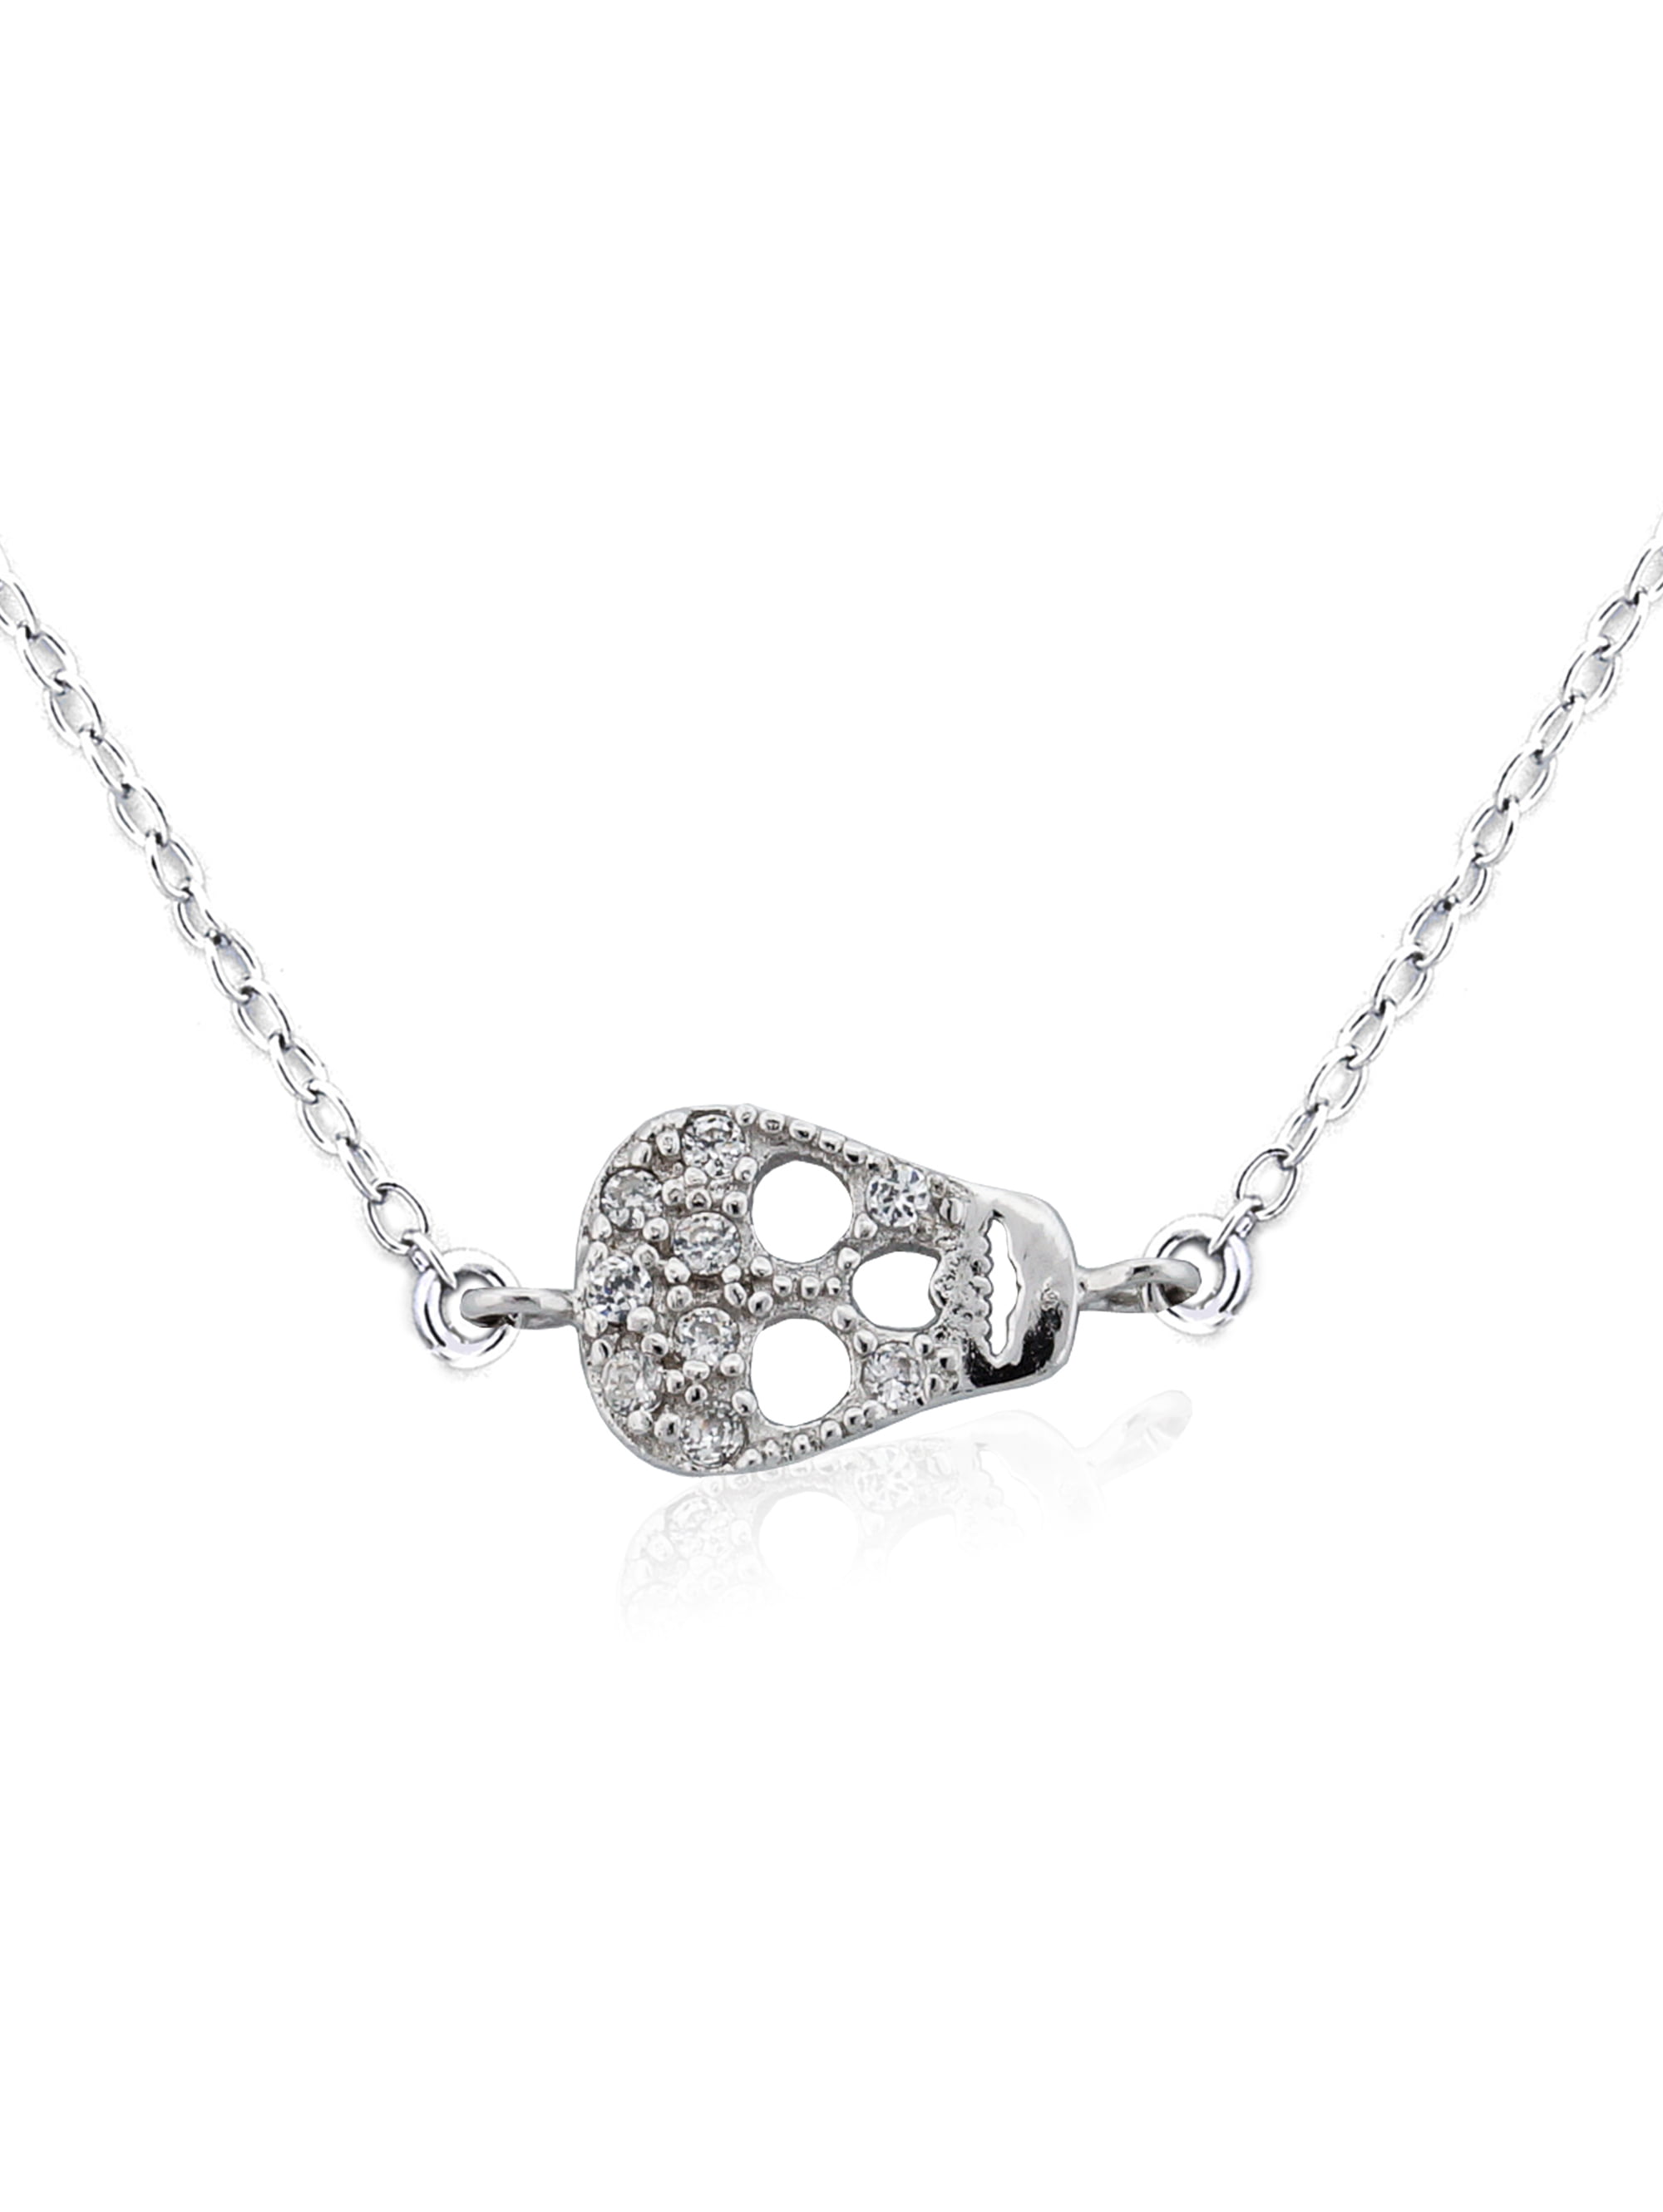 Sterling Silver Cz Skull Charm Necklace 18" 